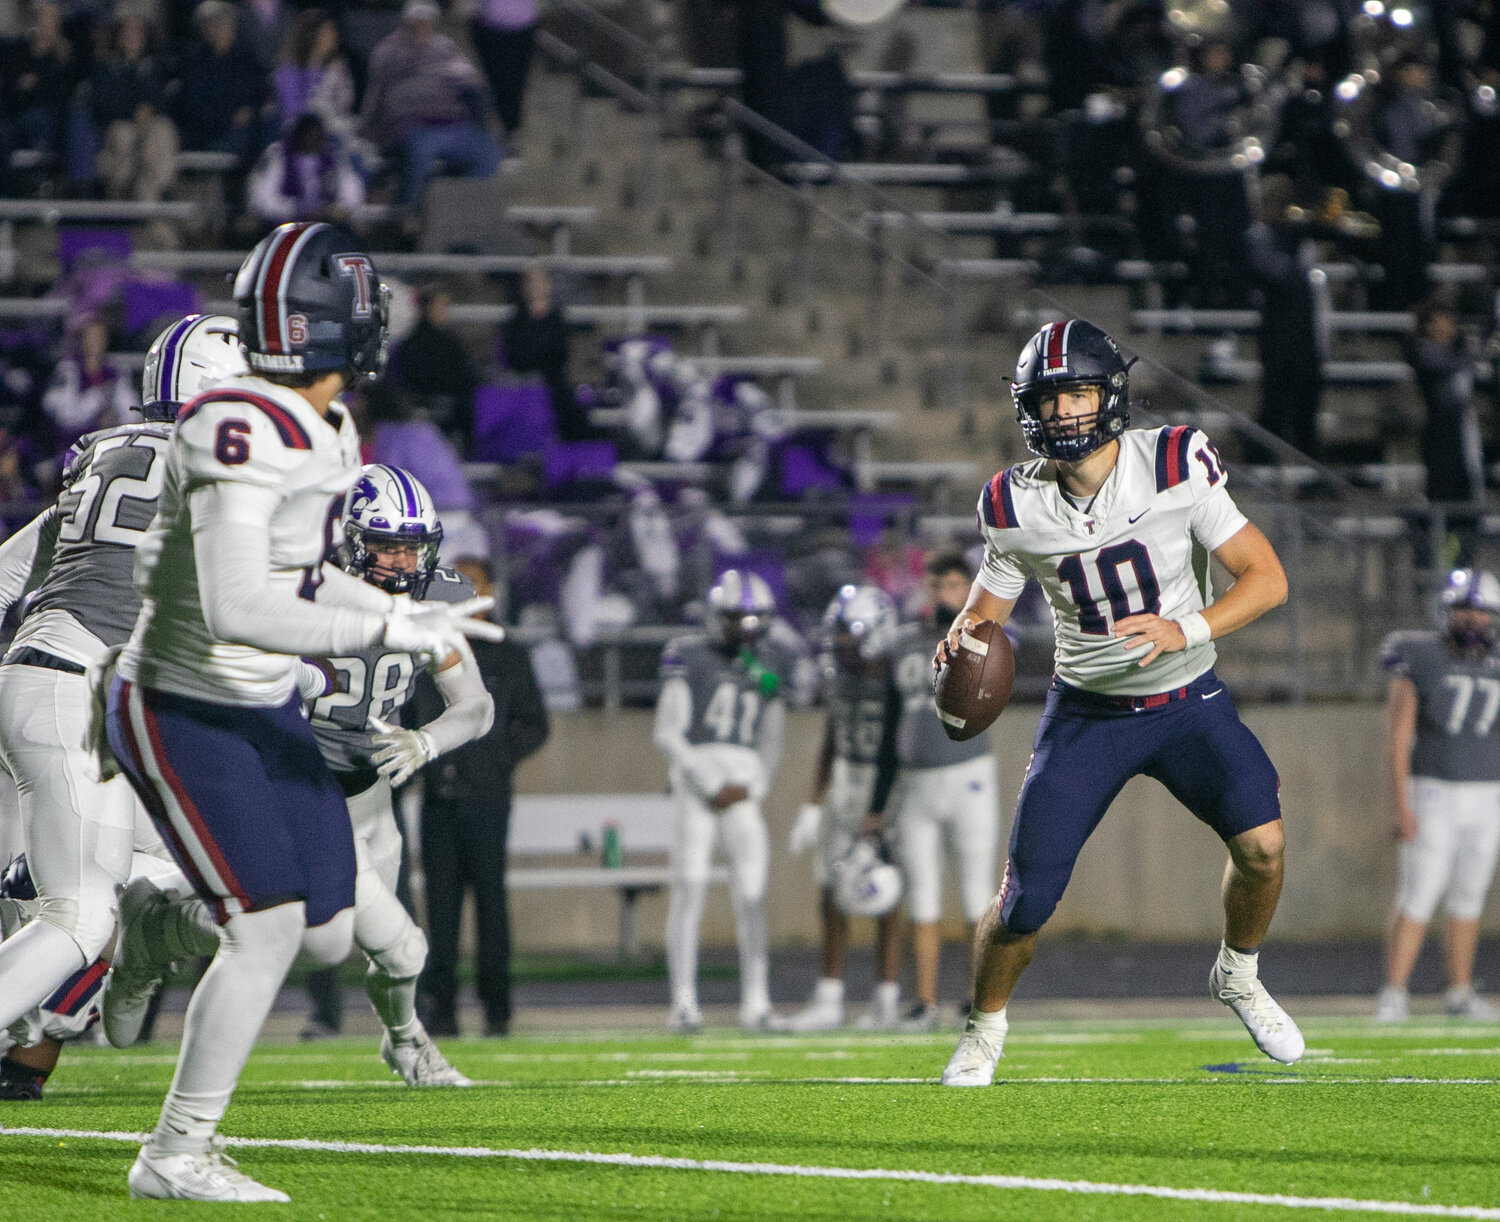 Wyatt Young looks to throw during Friday's game between Tompkins and Ridge Point at Hall Stadium.